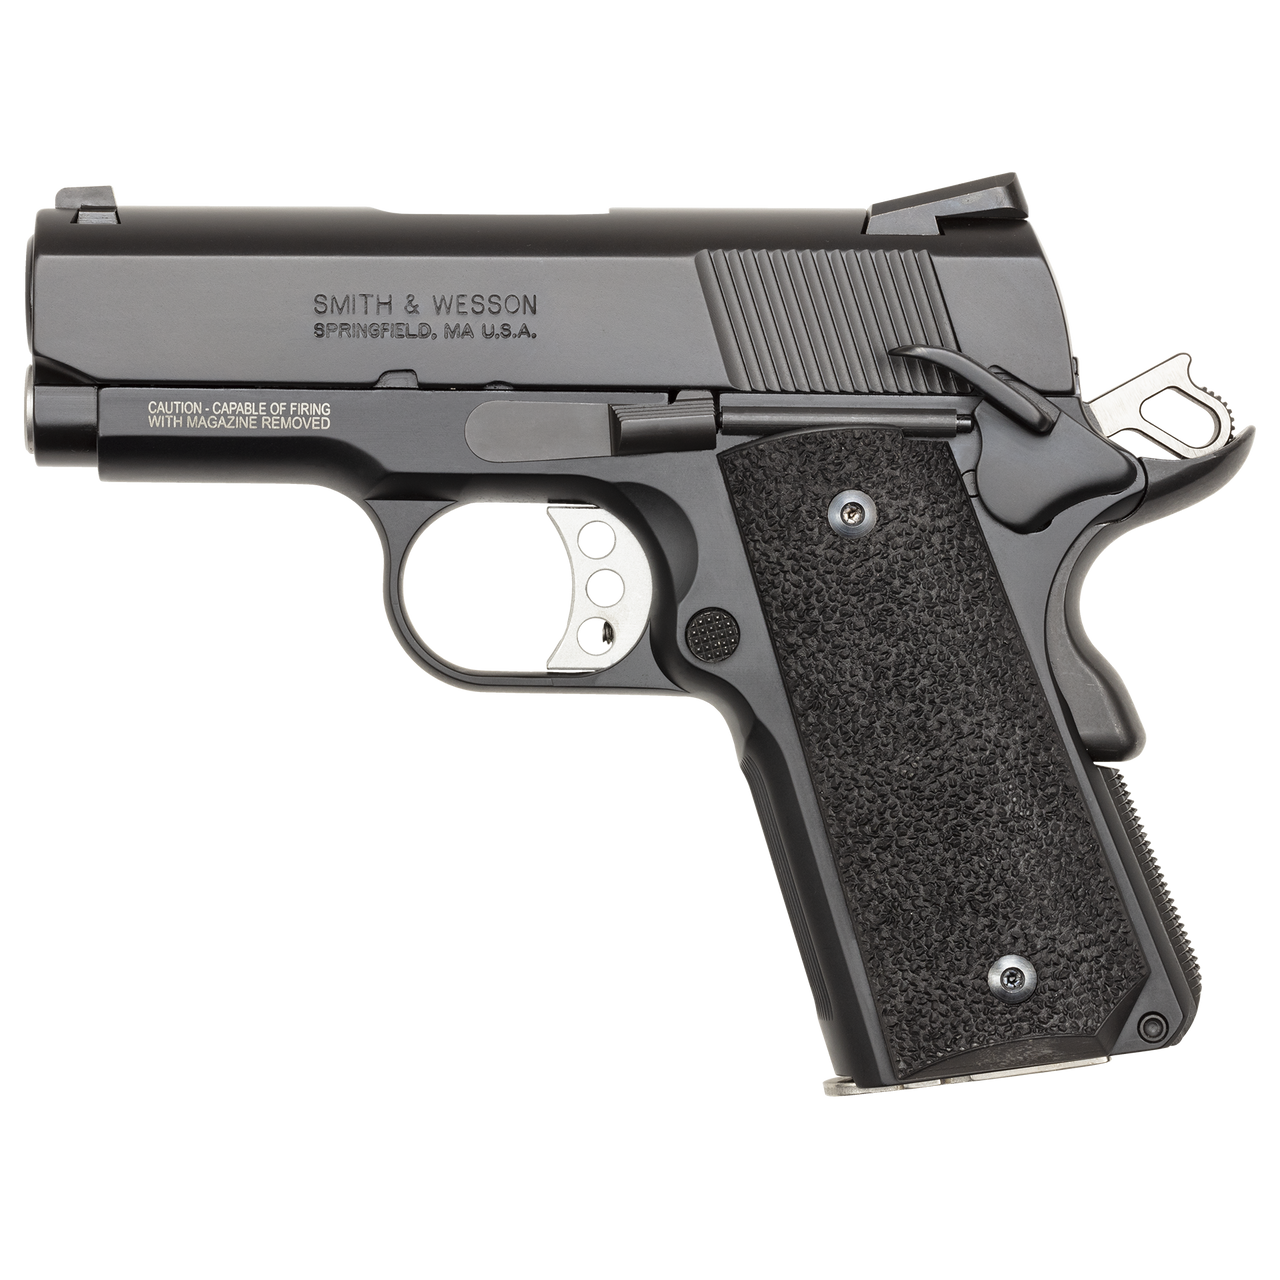 Buy Smith & Wesson Performance Center SW1911 Pro Series 9mm Pistol Online